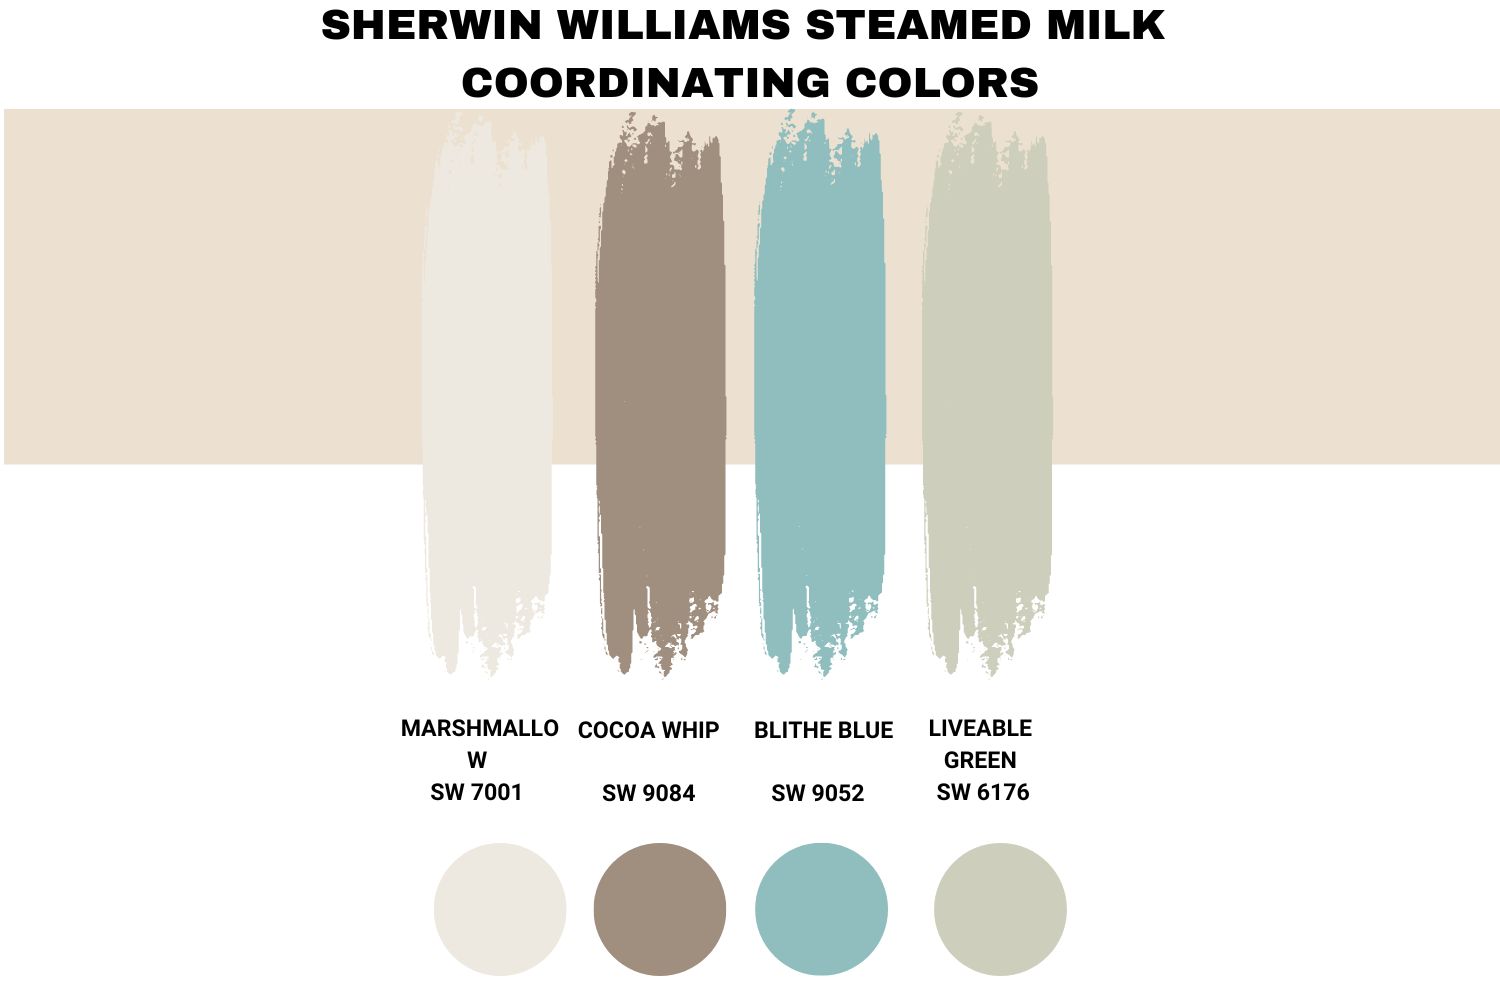 Sherwin Williams Steamed Milk Coordinating Colors